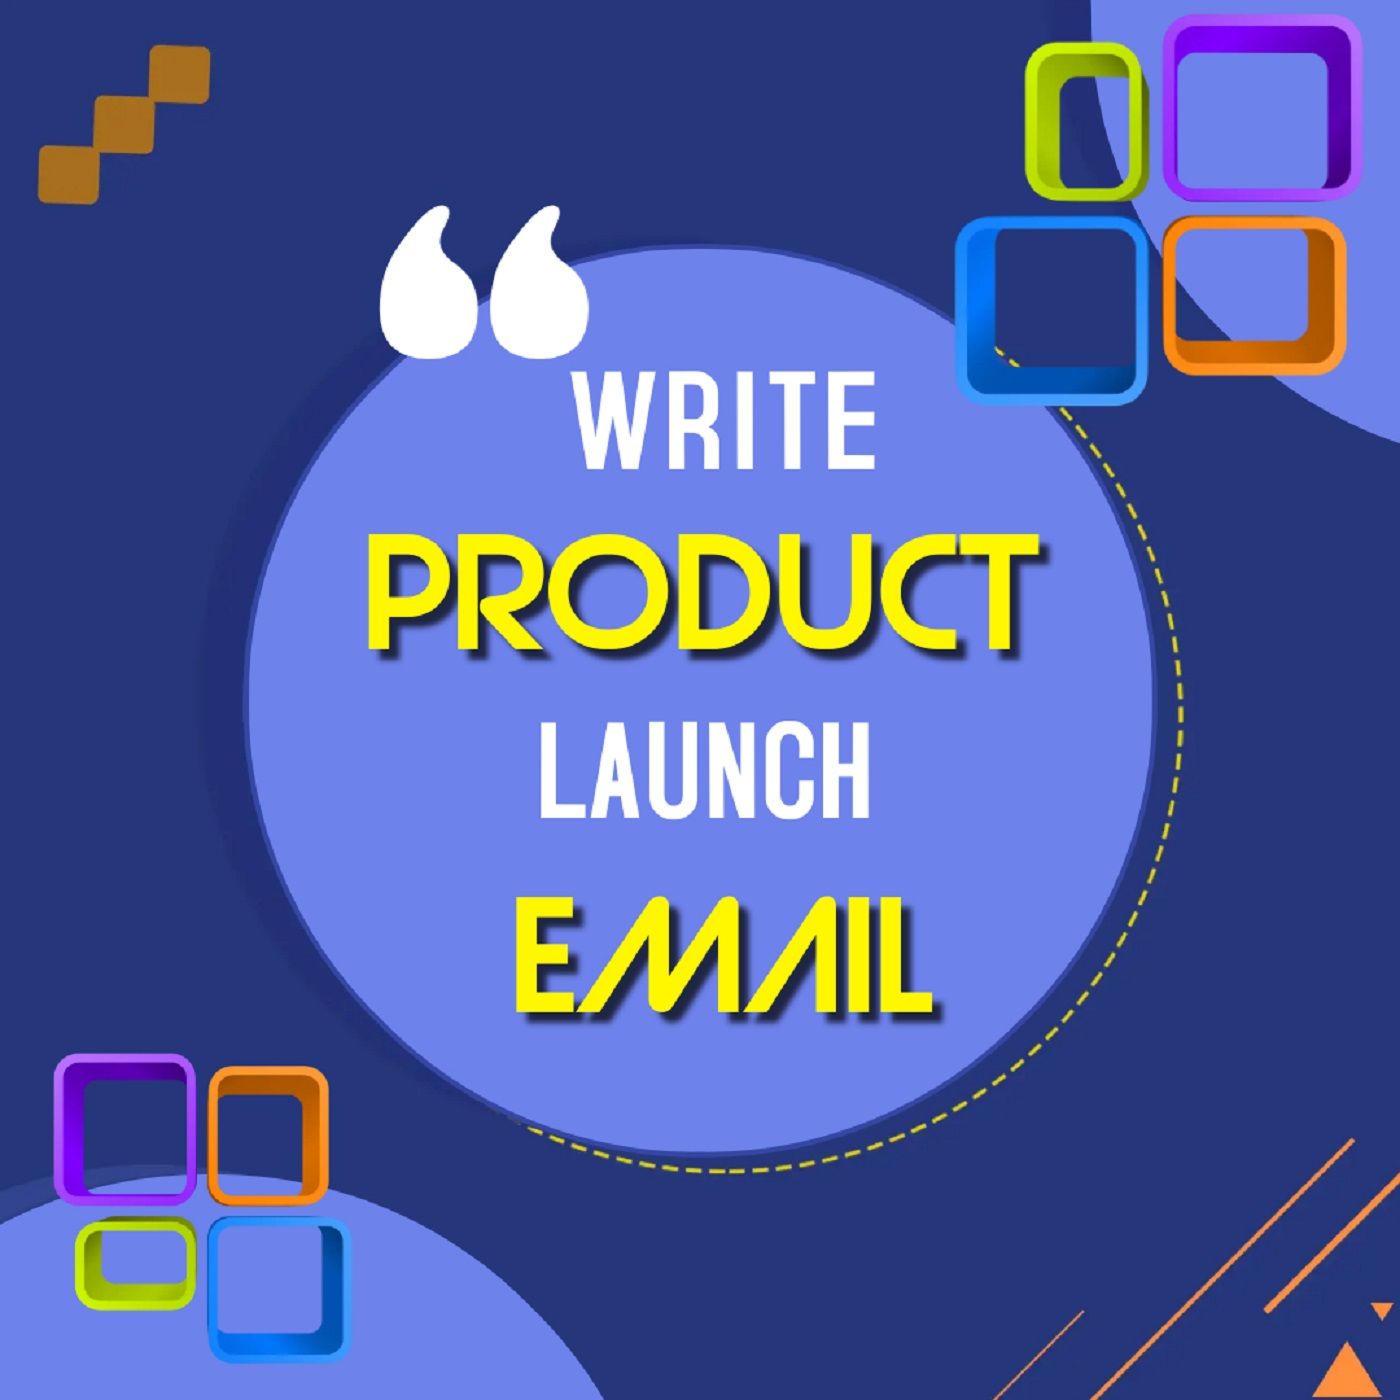 WRITE PRODUCT LAUNCH EMAIL